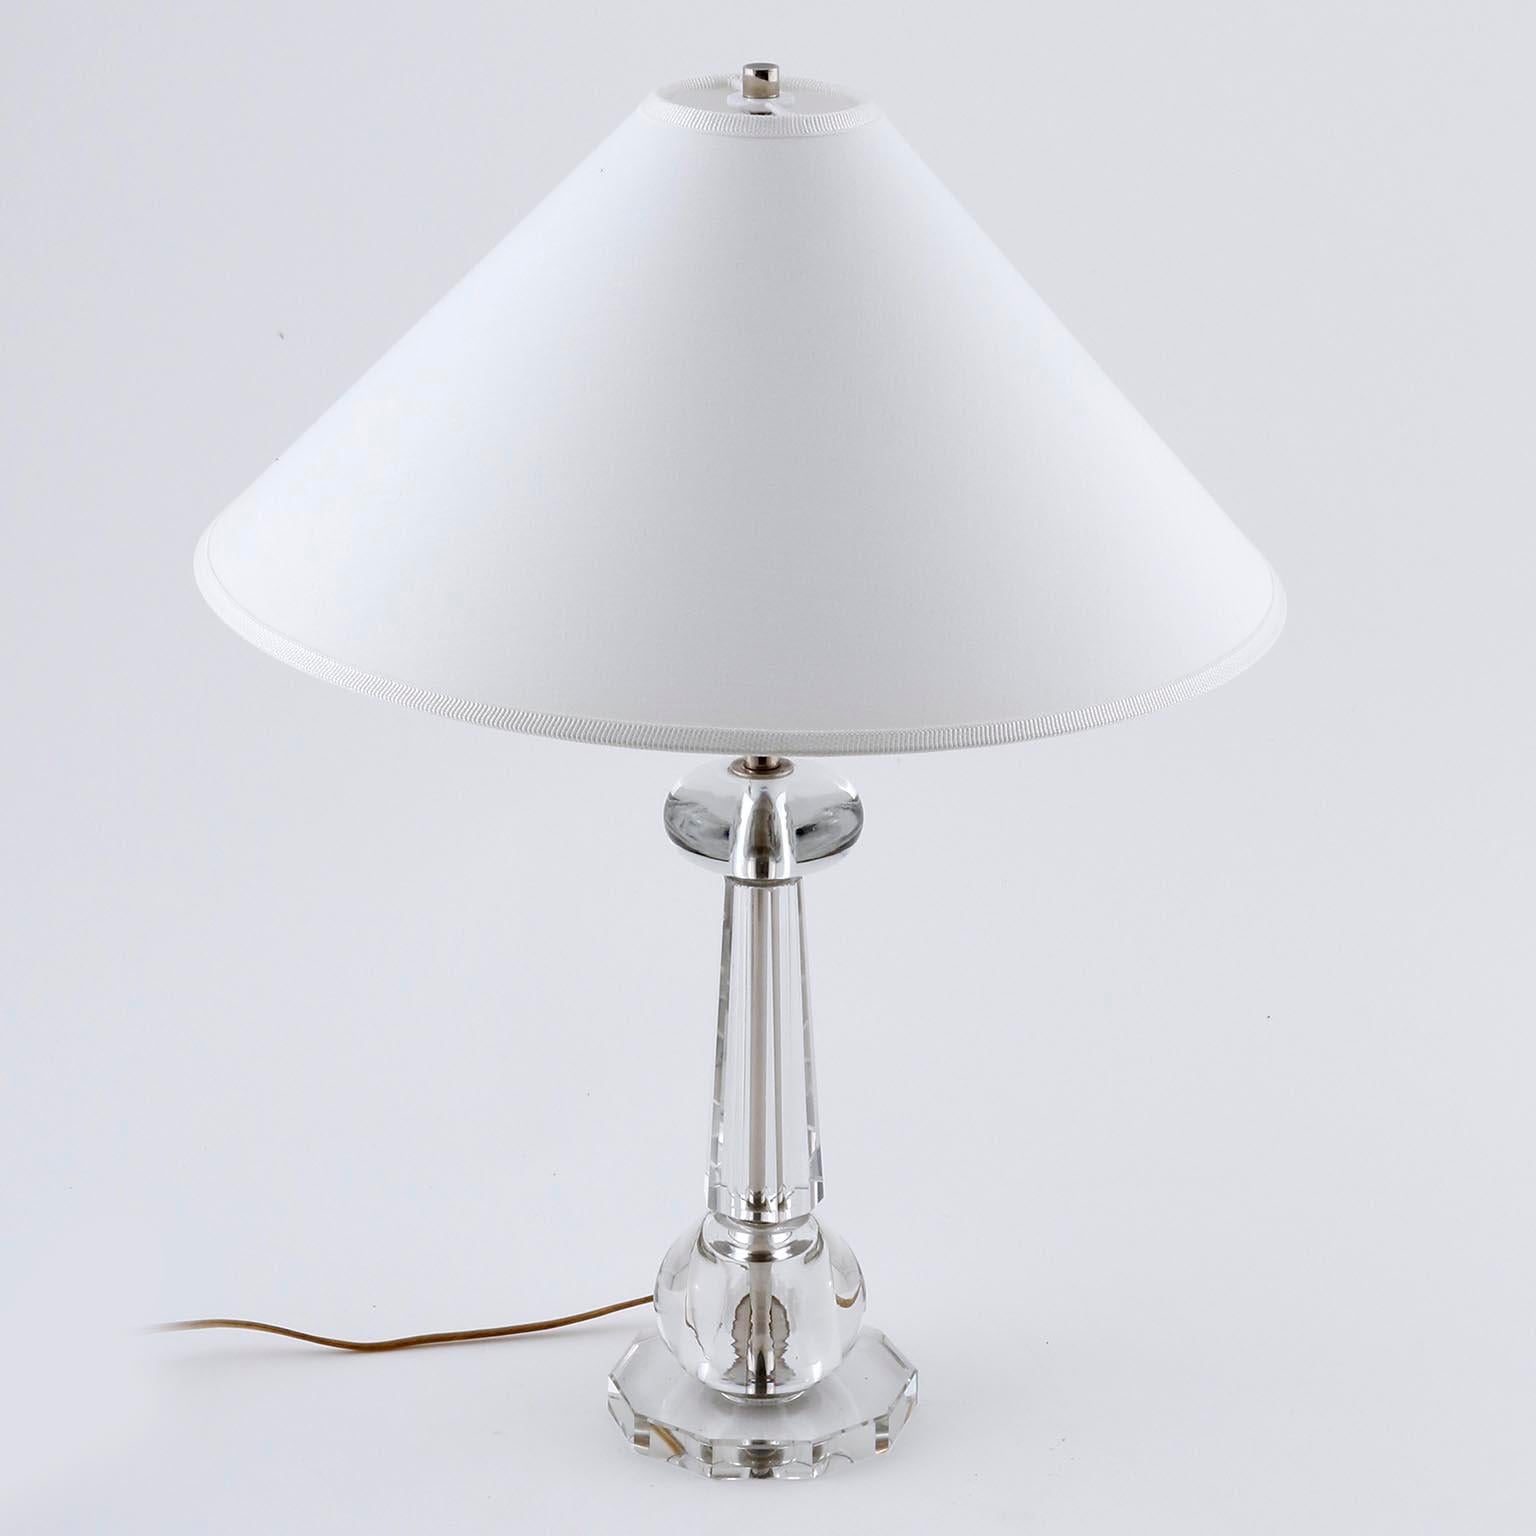 Mid-Century Modern Table Lamp, Nickel Cut Crystal Glass White Shade, Austria, 1950s For Sale